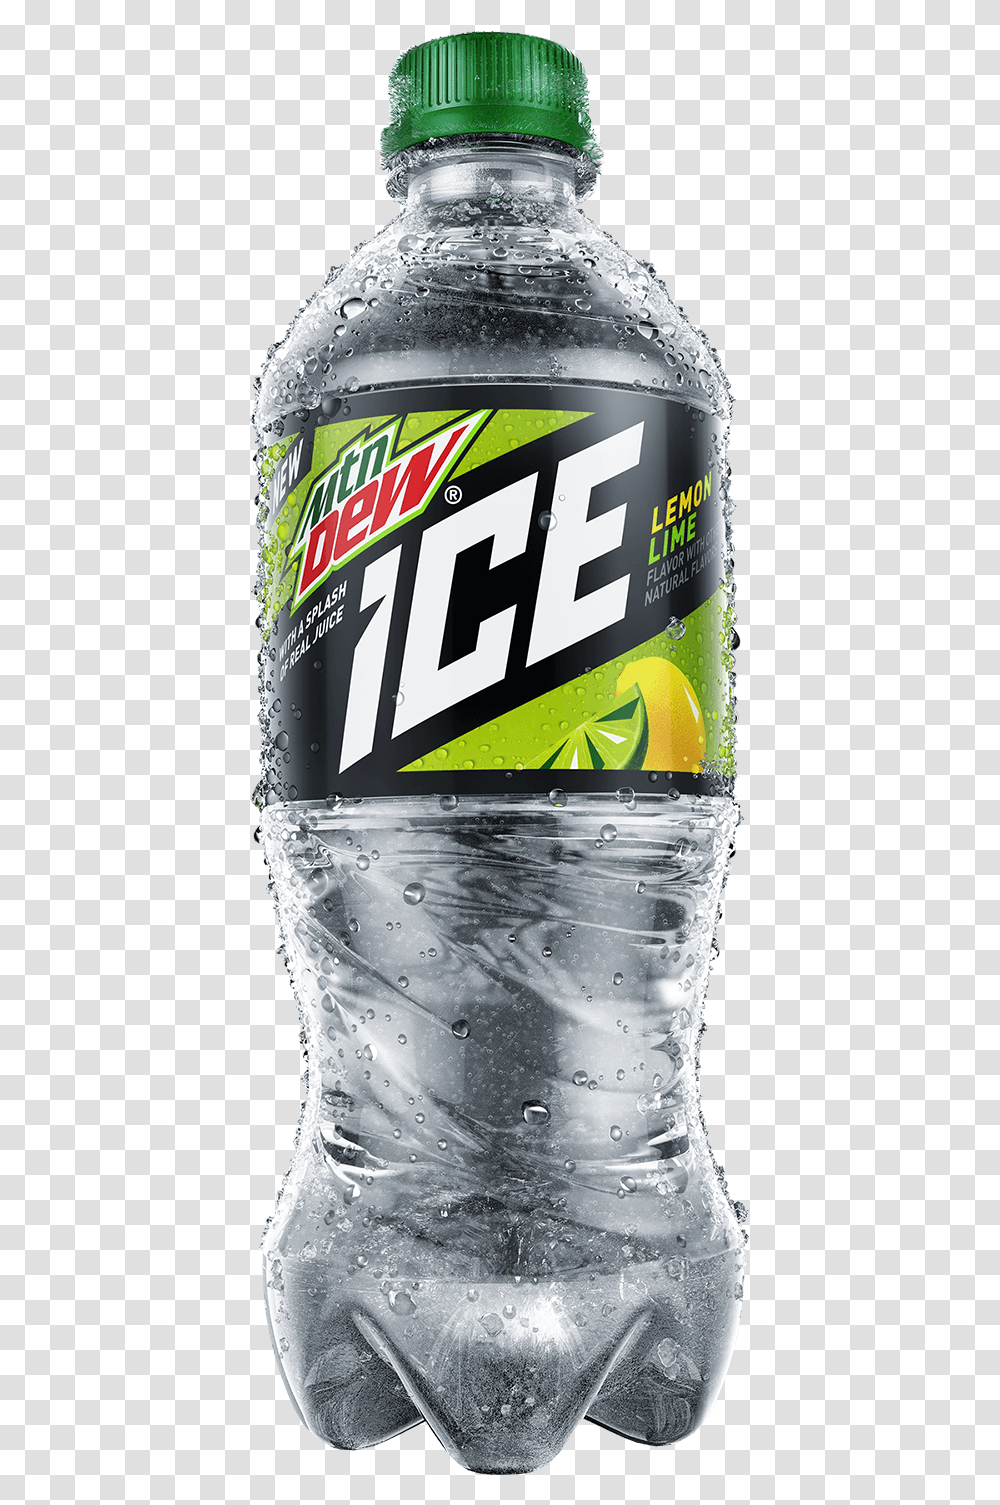 Mountain Dew New Mountain Dew Ice, Mineral Water, Beverage, Water Bottle, Drink Transparent Png